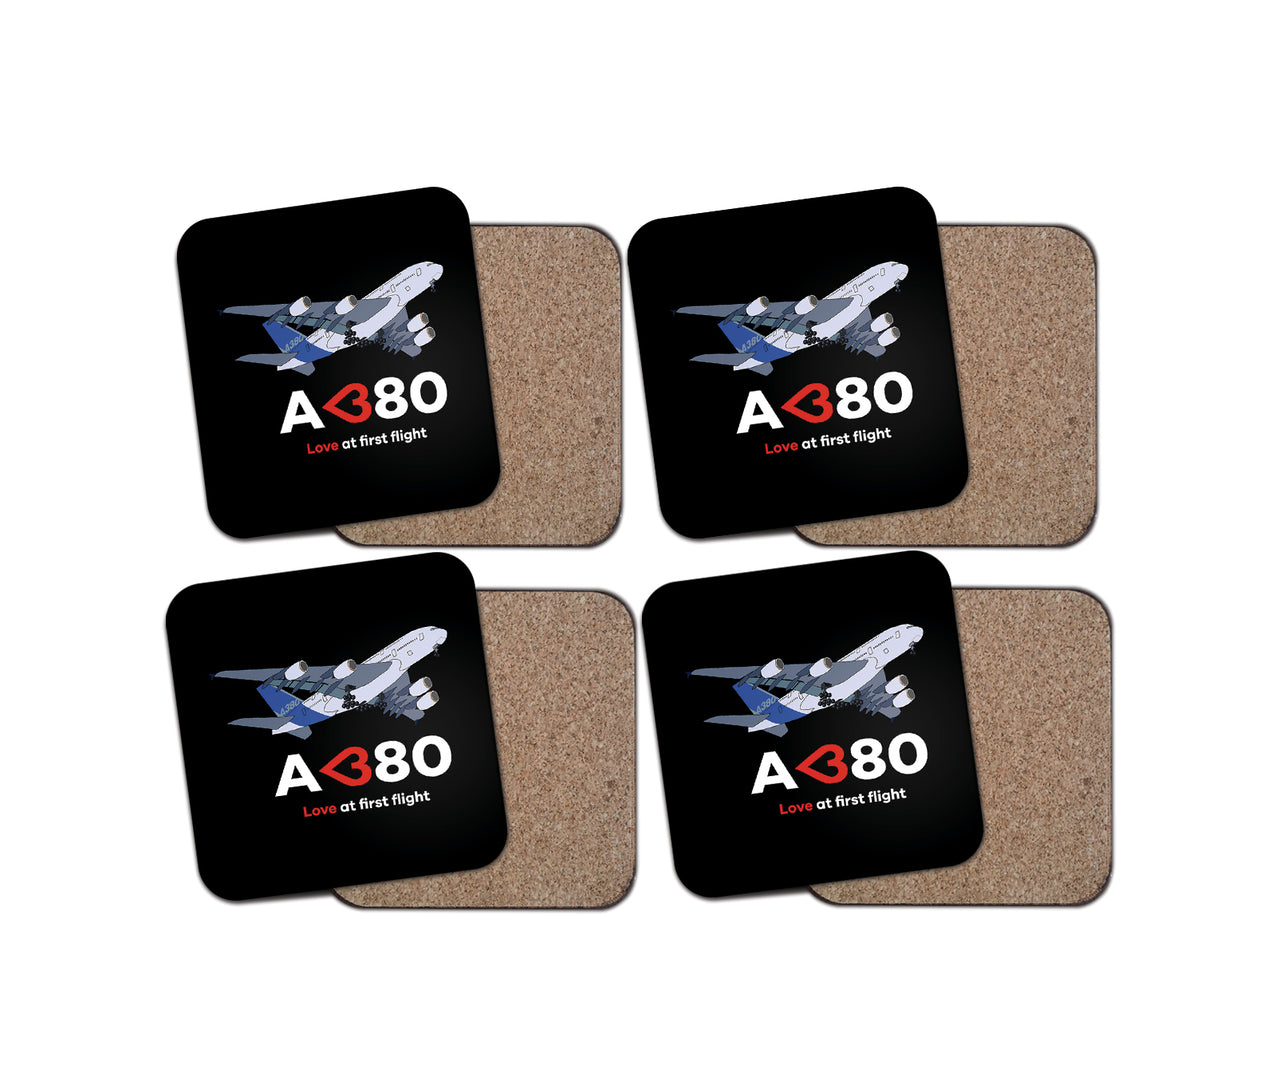 Airbus A380 Love at first flight Designed Coasters